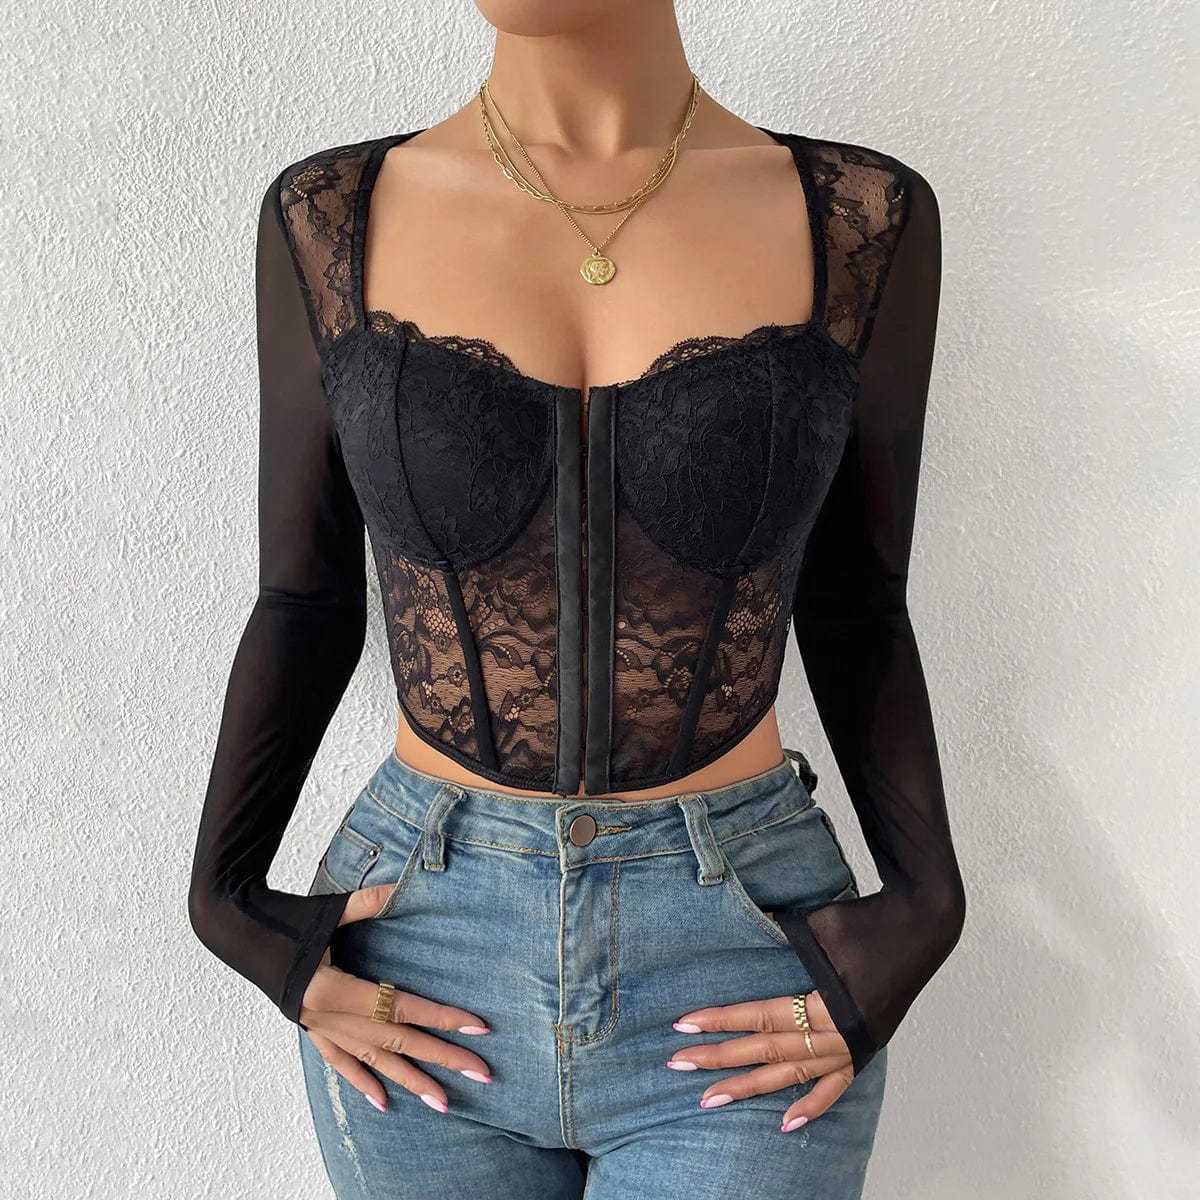 Backless Sexy Lace Long Sleeve Women's Blouse Floral Embroidery Bodycon Crop Top